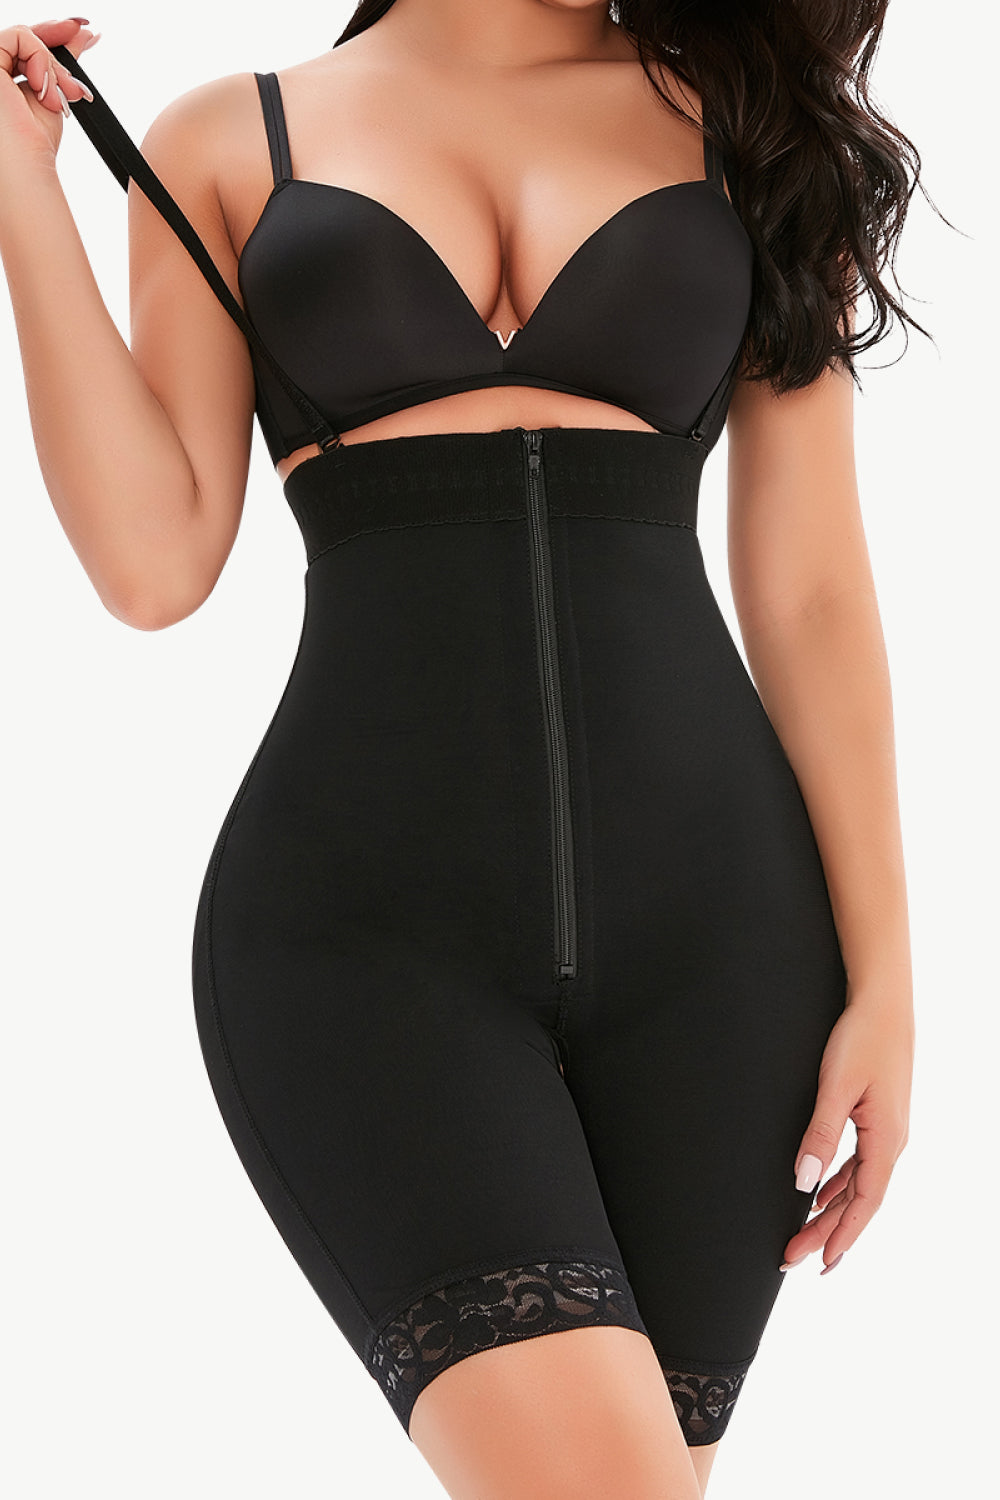 Full Size Lace Detail Zip-Up Under-Bust Shaping Bodysuit -  Nueva Moda Boutique By Giselly 